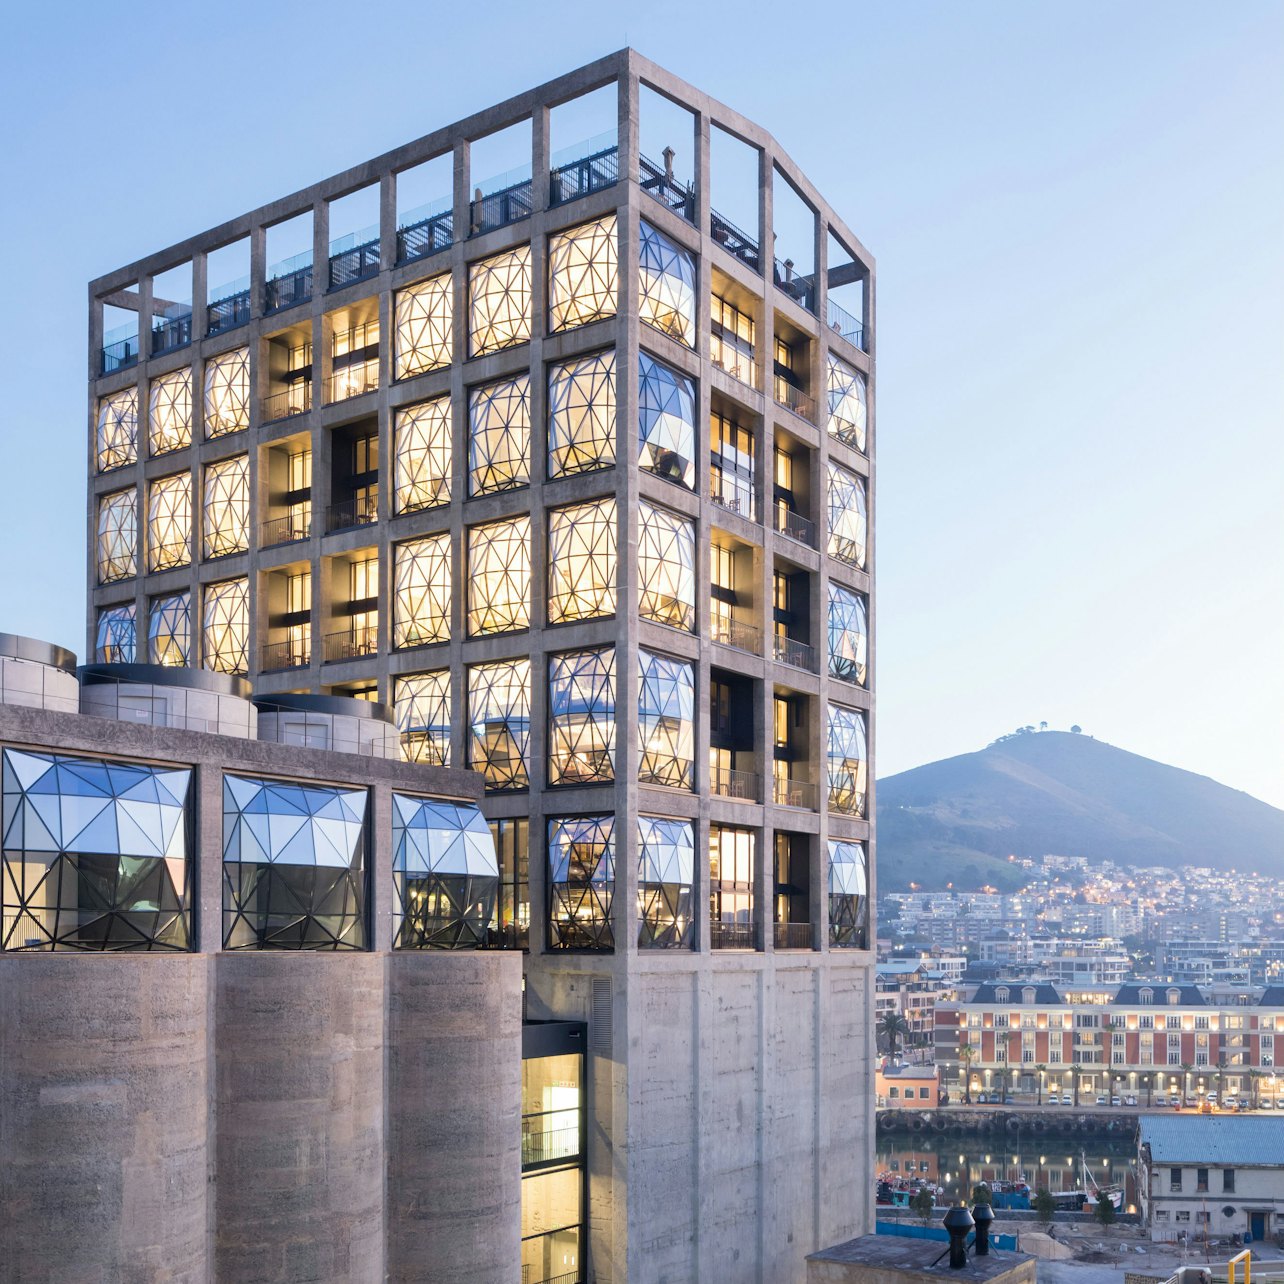 Zeitz MOCAA Museum: Fast Track - Accommodations in Cape Town